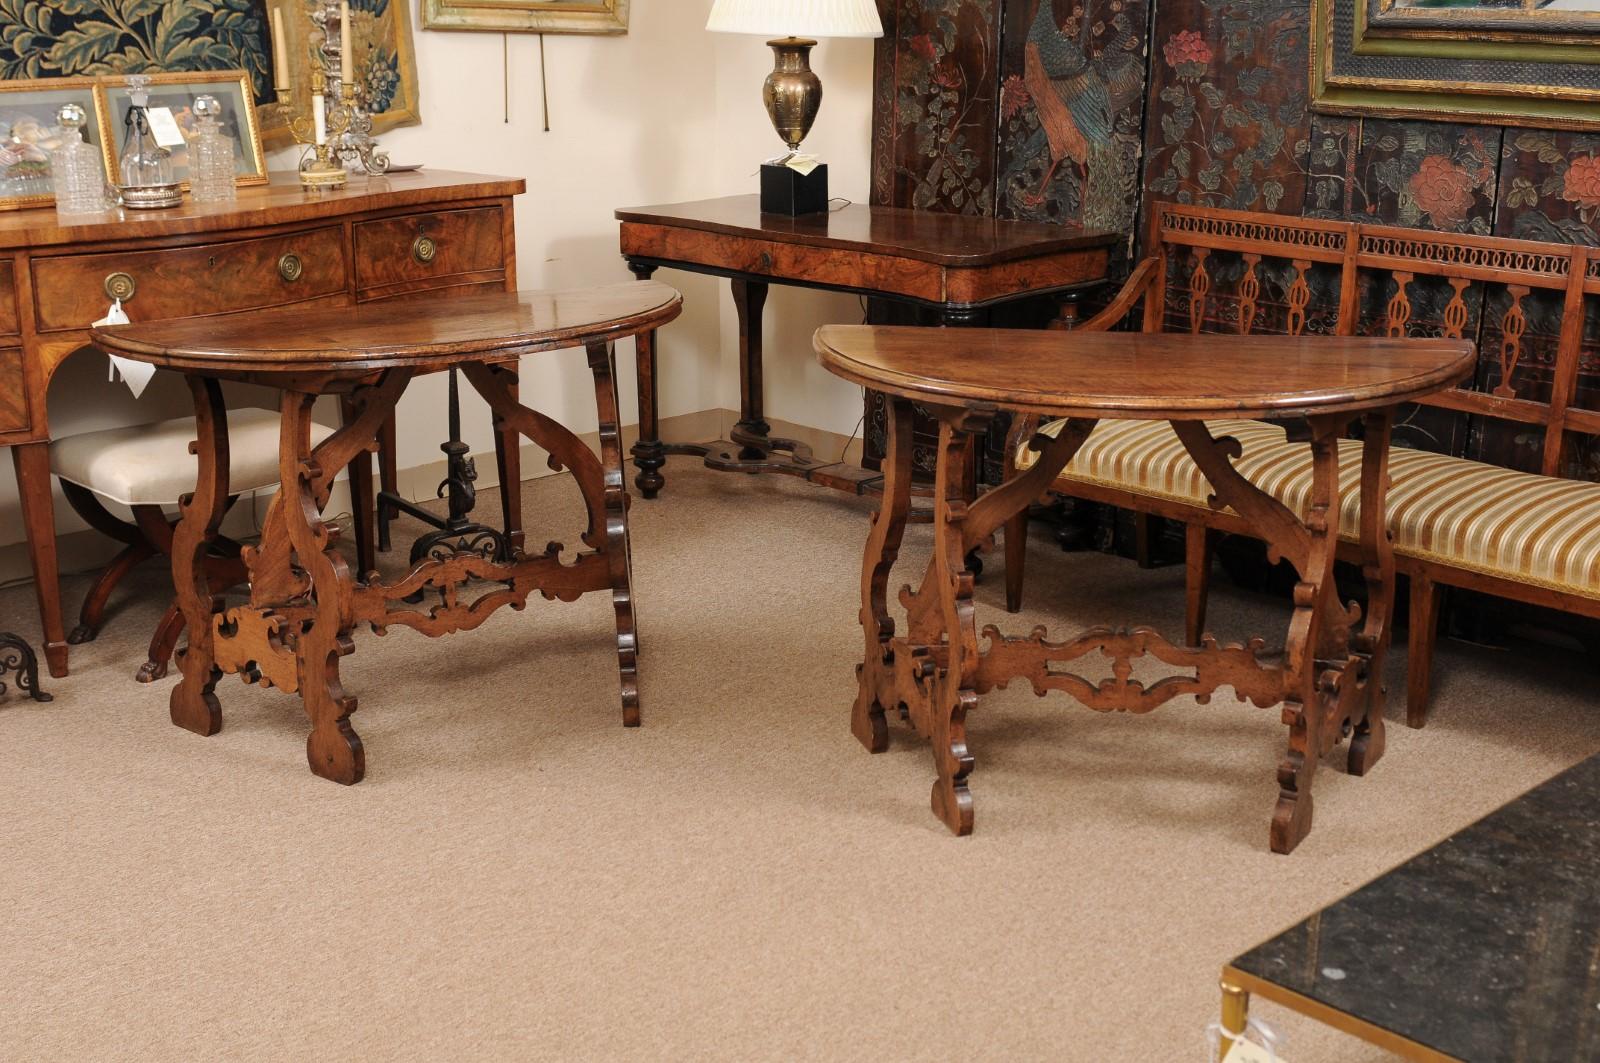 The pair of Italian 18th century Italian walnut demilune console tables with lyre shaped legs.